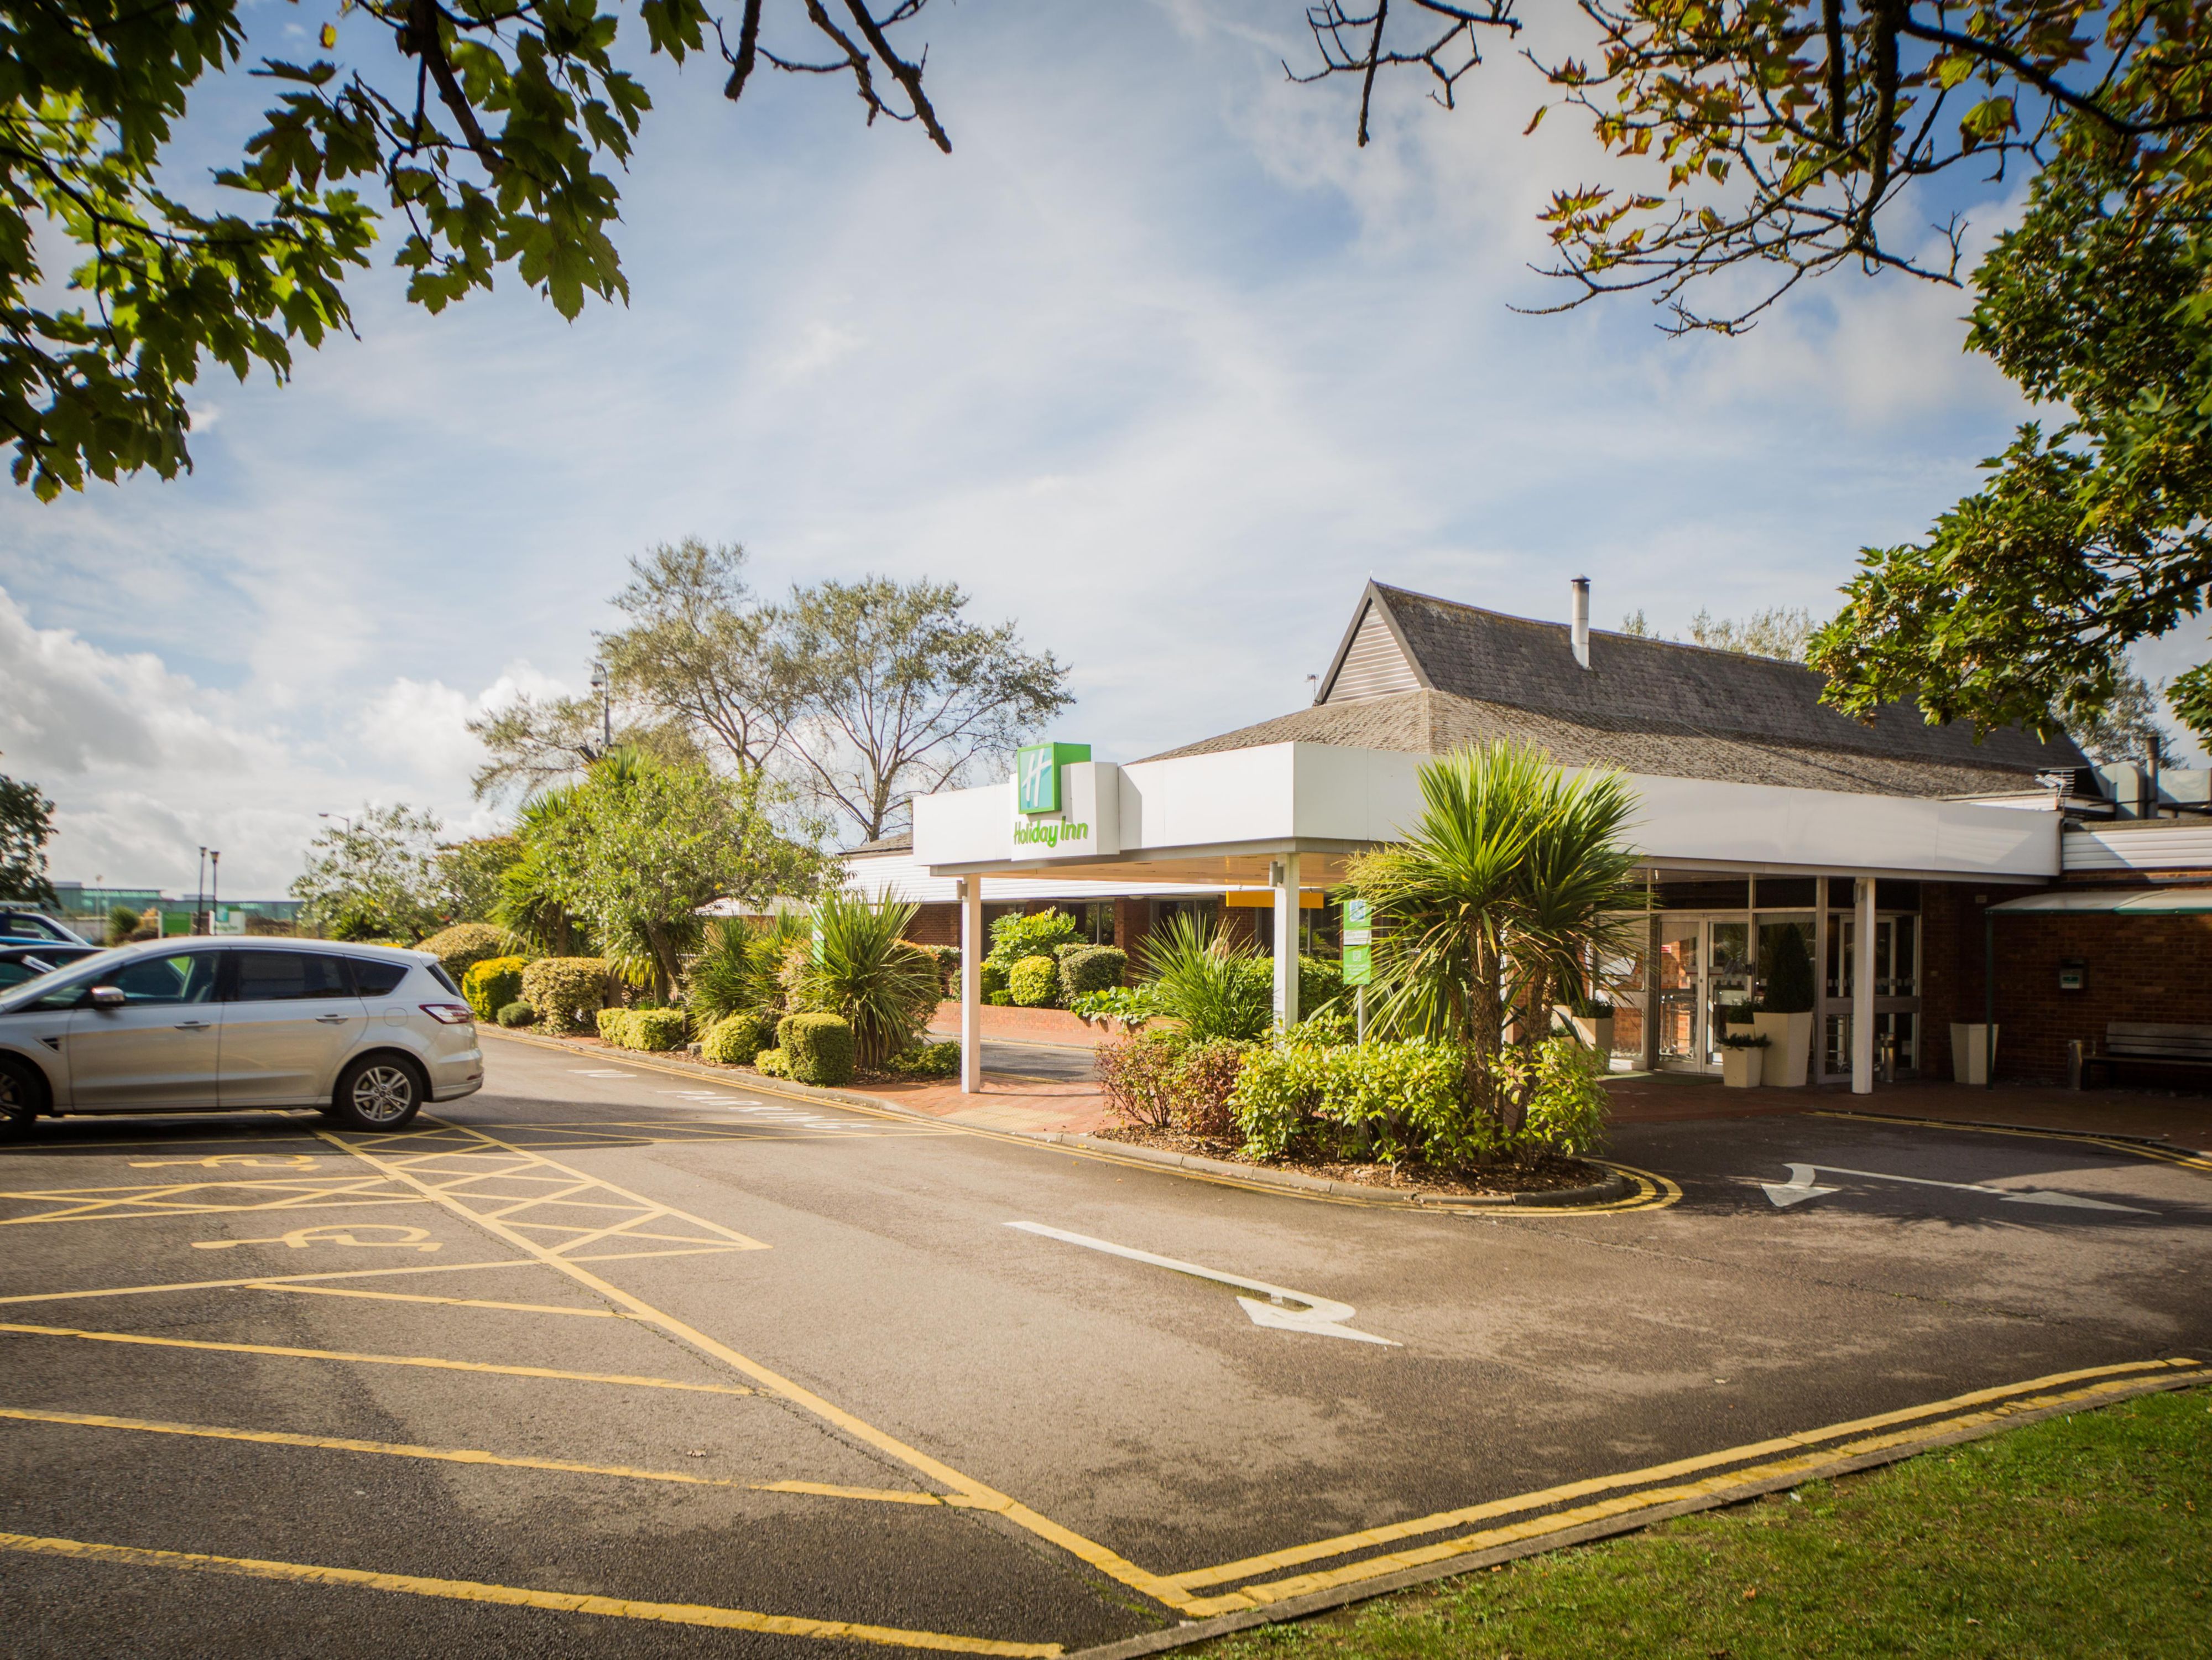 We have ample car parking facilities on-site with a charging station available to guests.  